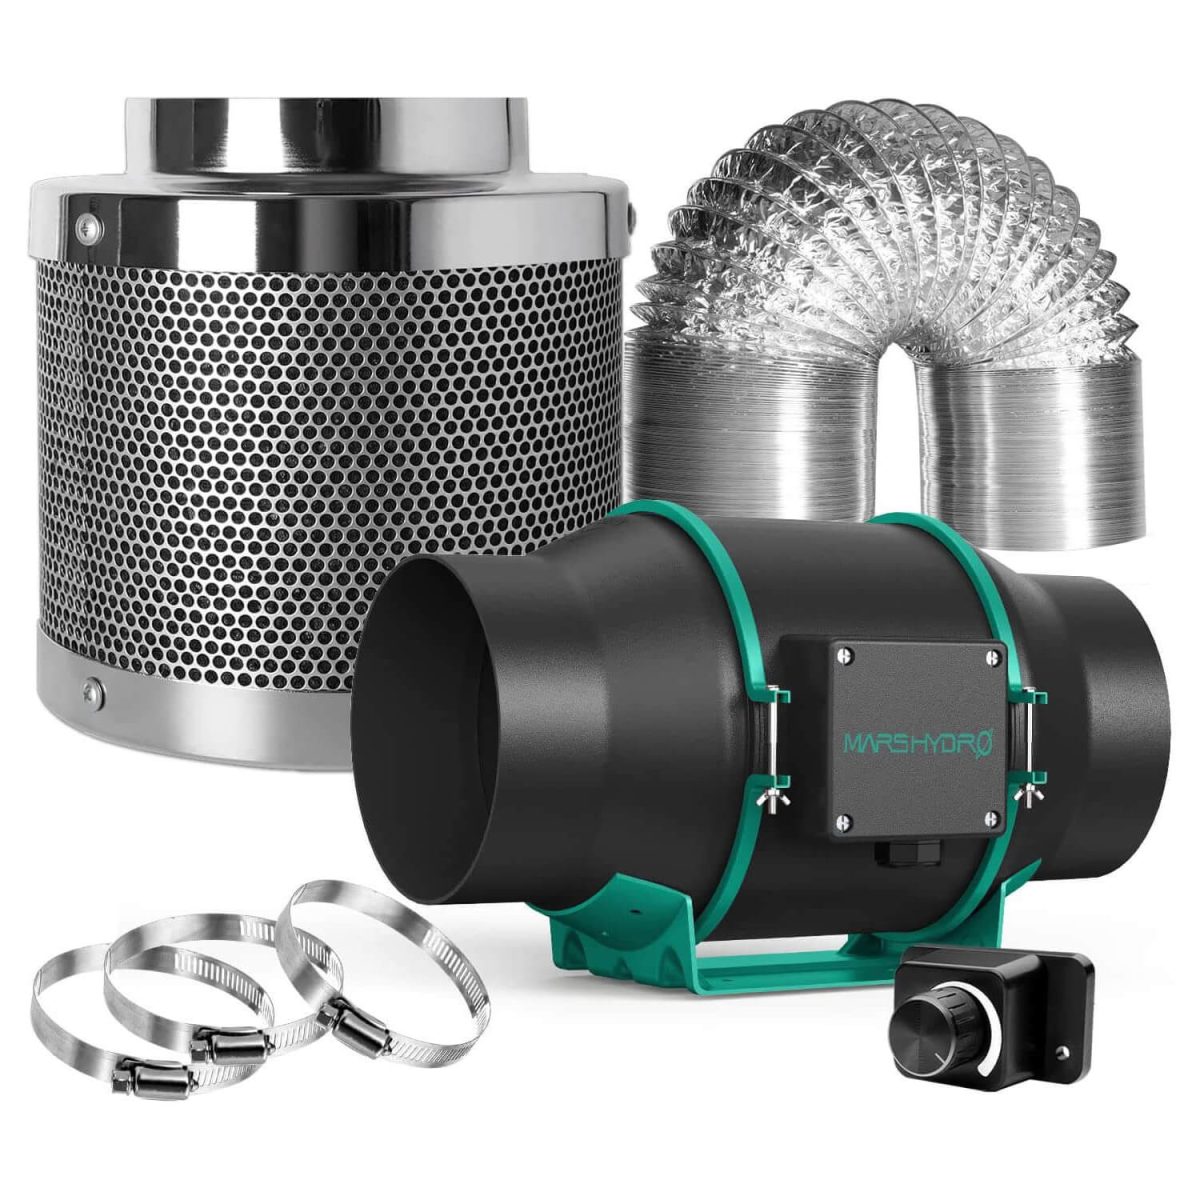 mars hydro 6 inch fan & carbon filter & ducting combo with speed control